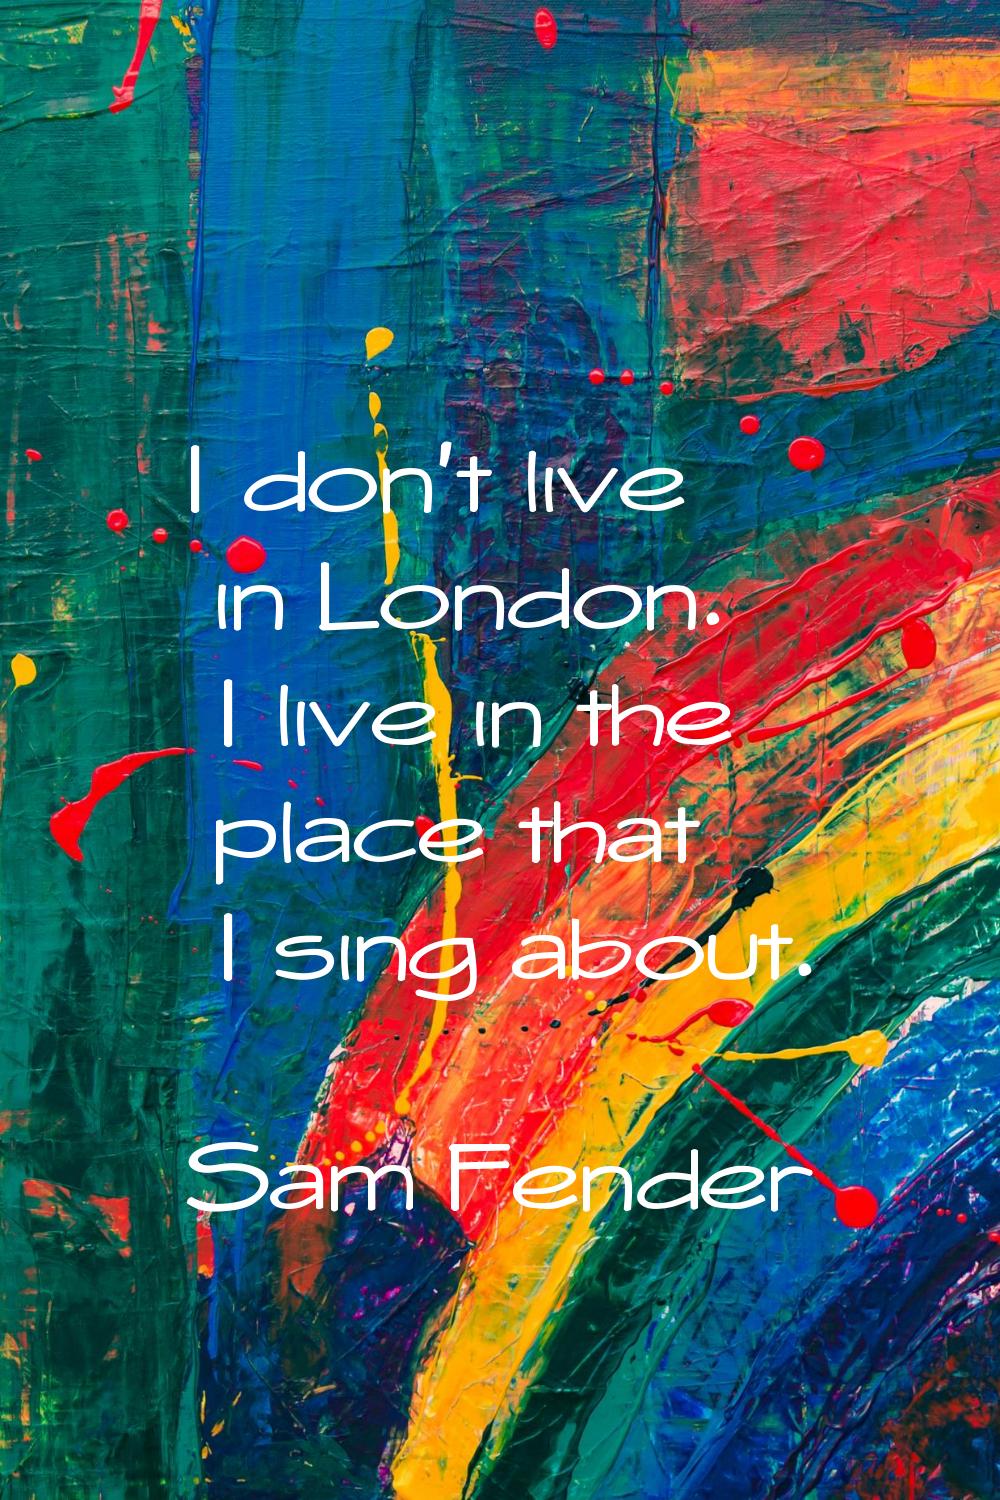 I don't live in London. I live in the place that I sing about.